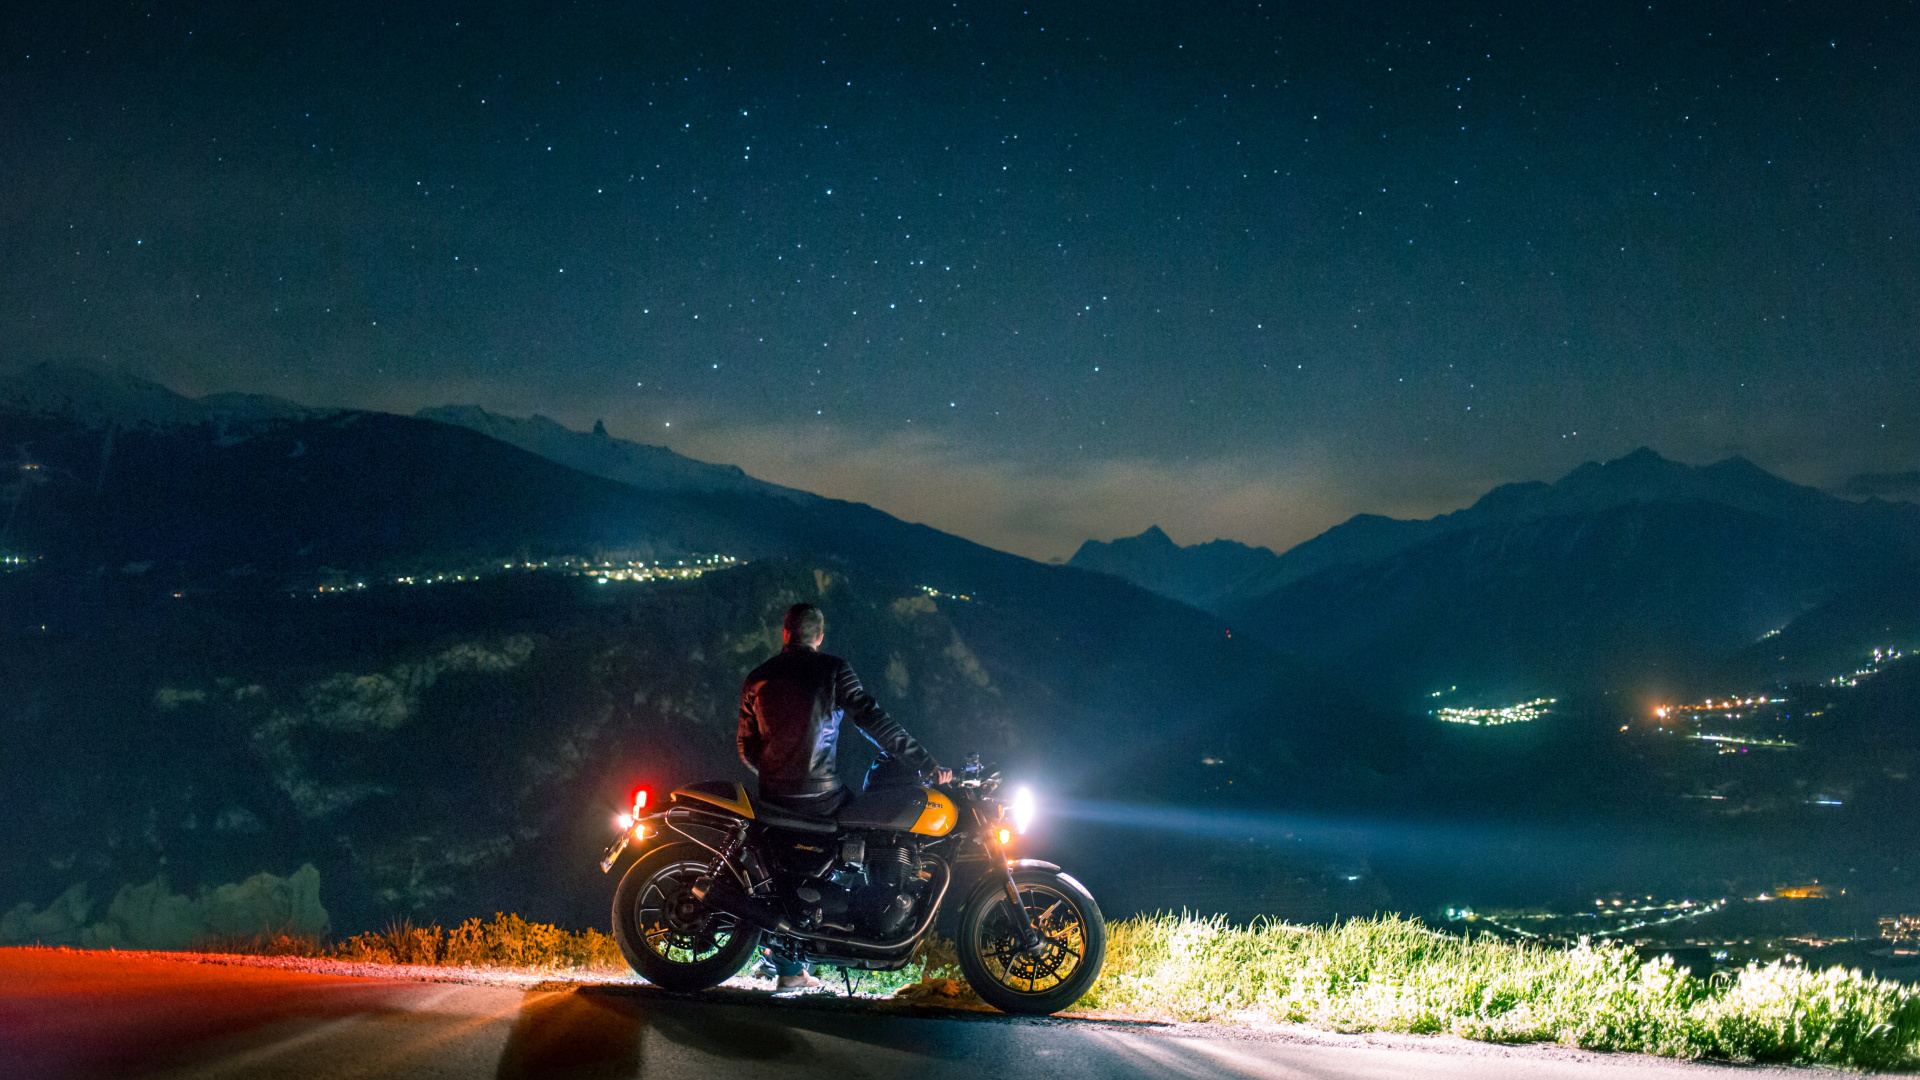 Man Riding Motorcycle on Road During Night Time. Wallpaper in 1920x1080 Resolution